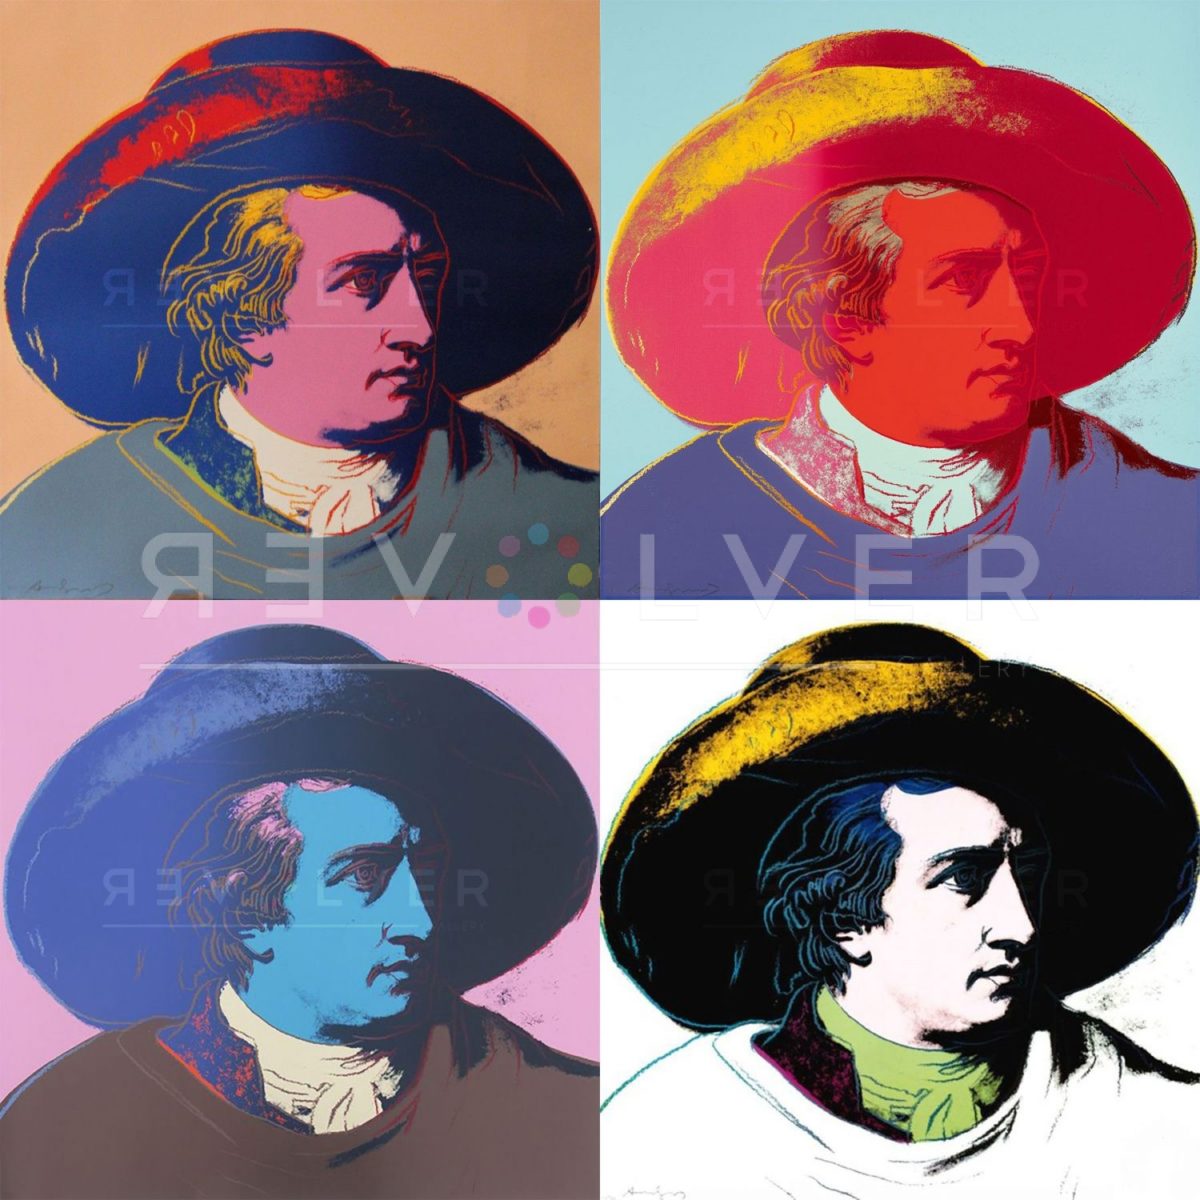 Andy Warhol Goethe complete portfolio, 2x2 grid showing four Goethe prints with the Revolver gallery watermark.